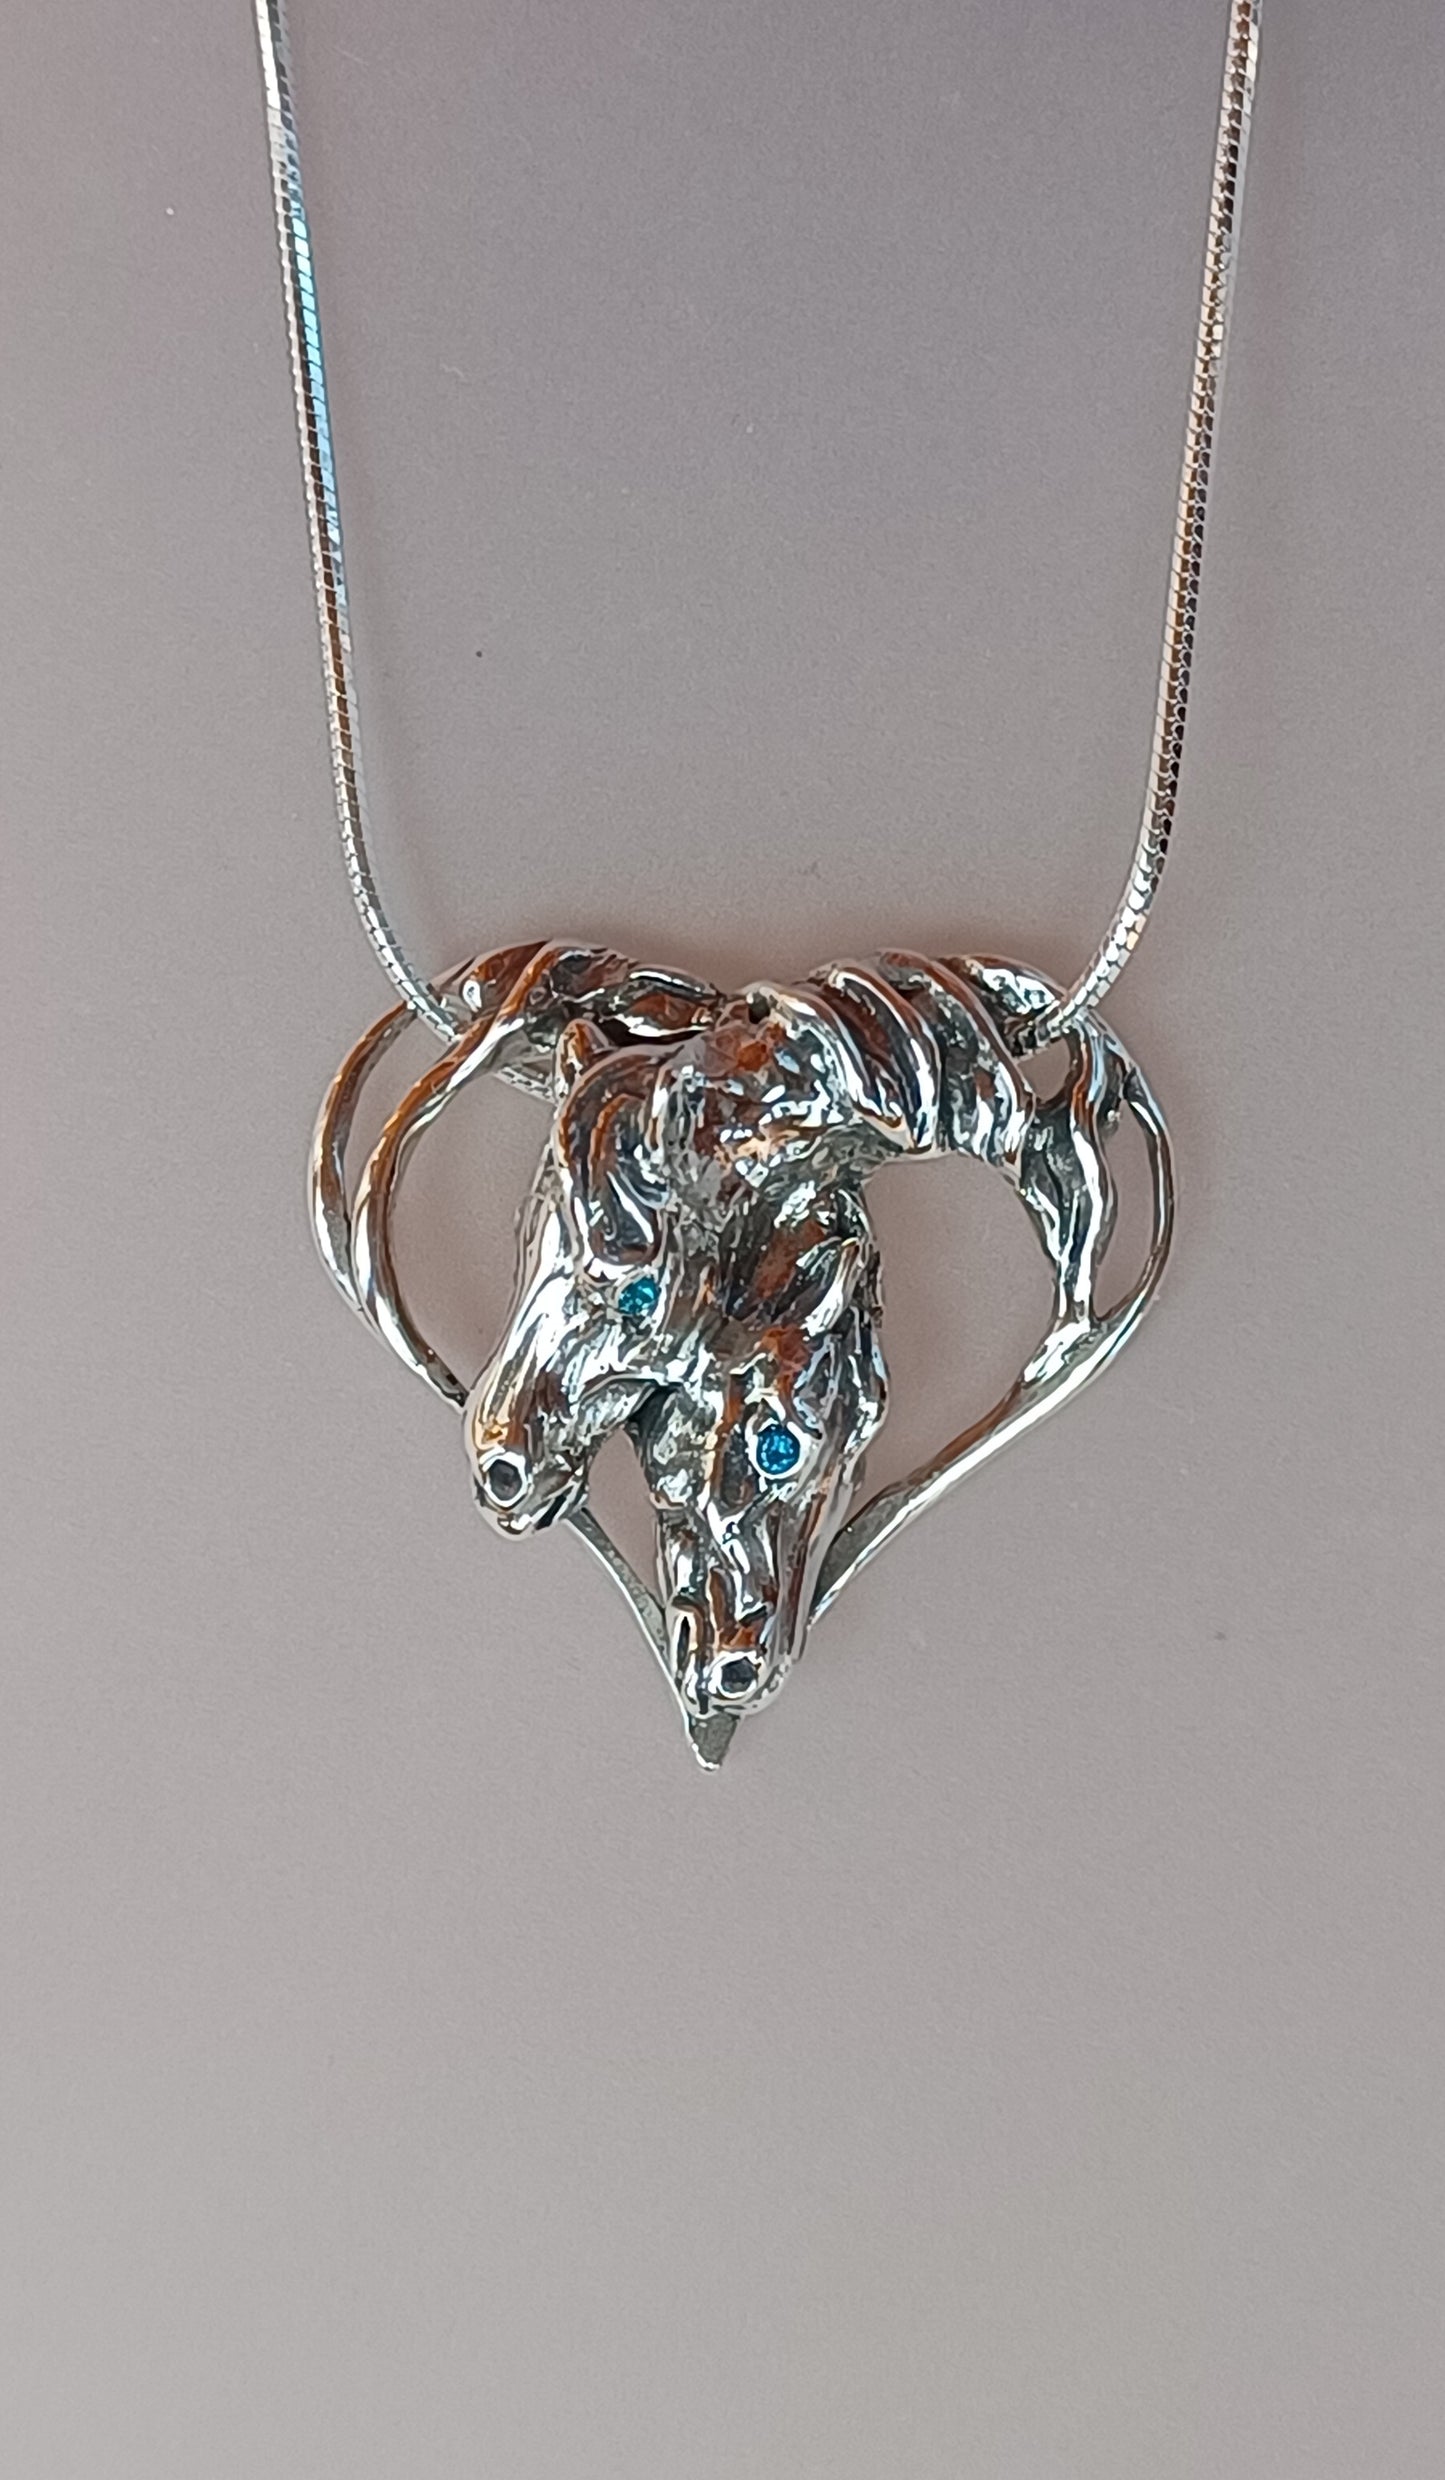 Artisan Heart with Horses Sterling Silver necklace pendant and chain. Equestrian Jewelry